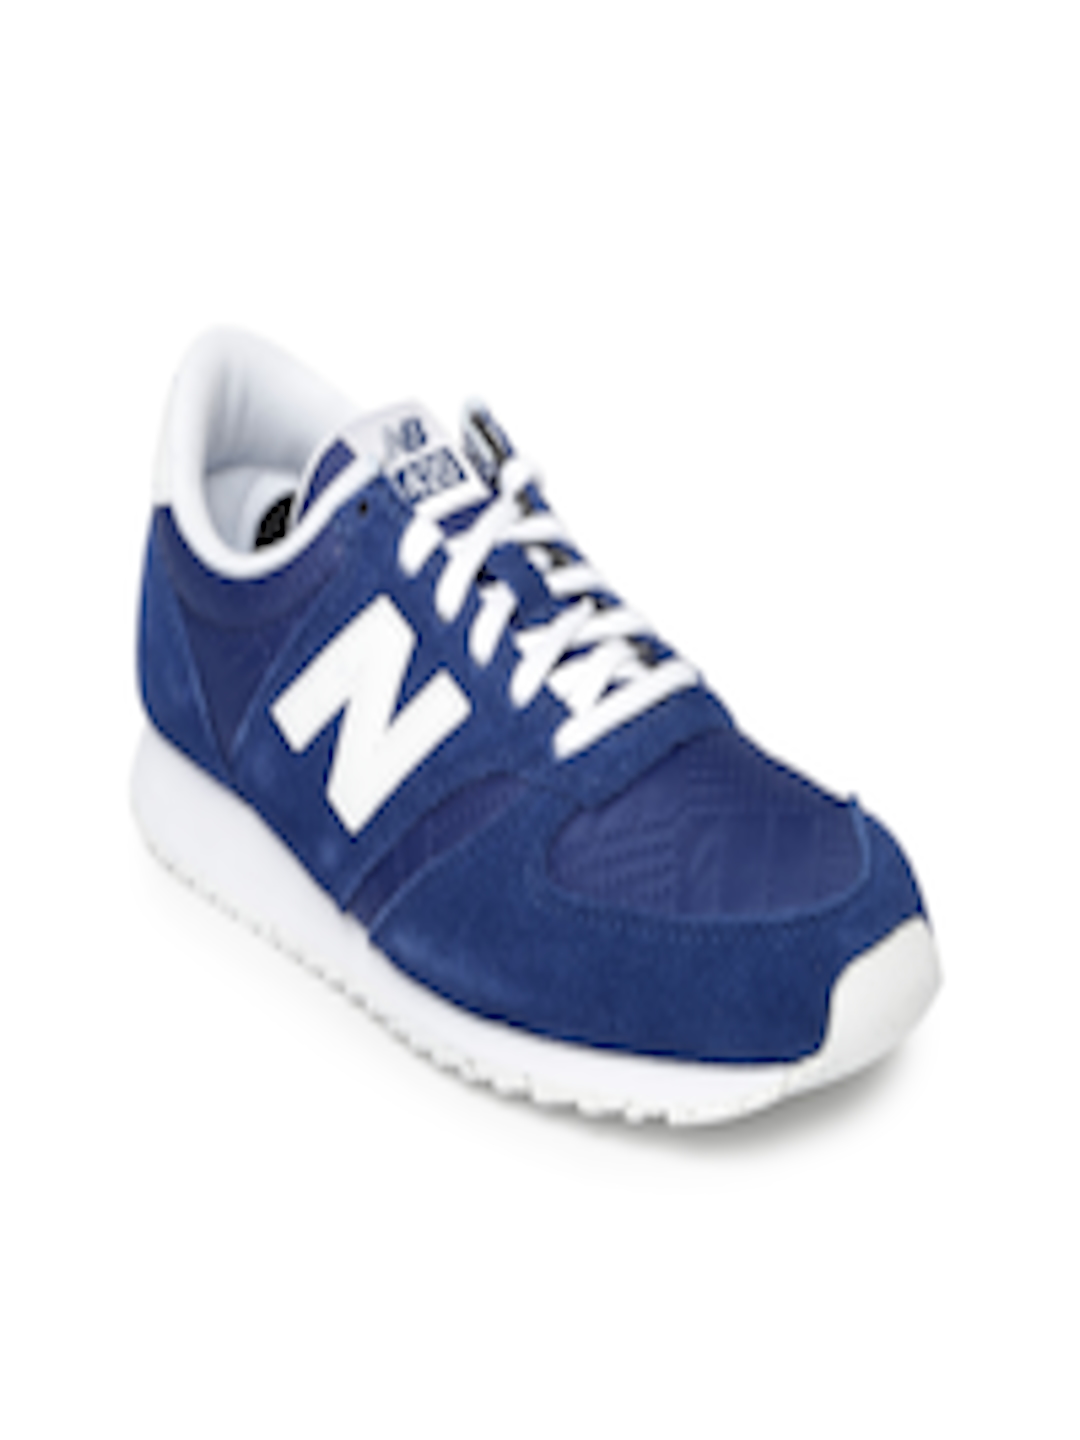 Buy New Balance Women Navy Blue Suede Sneakers WL420NPE - Casual Shoes ...